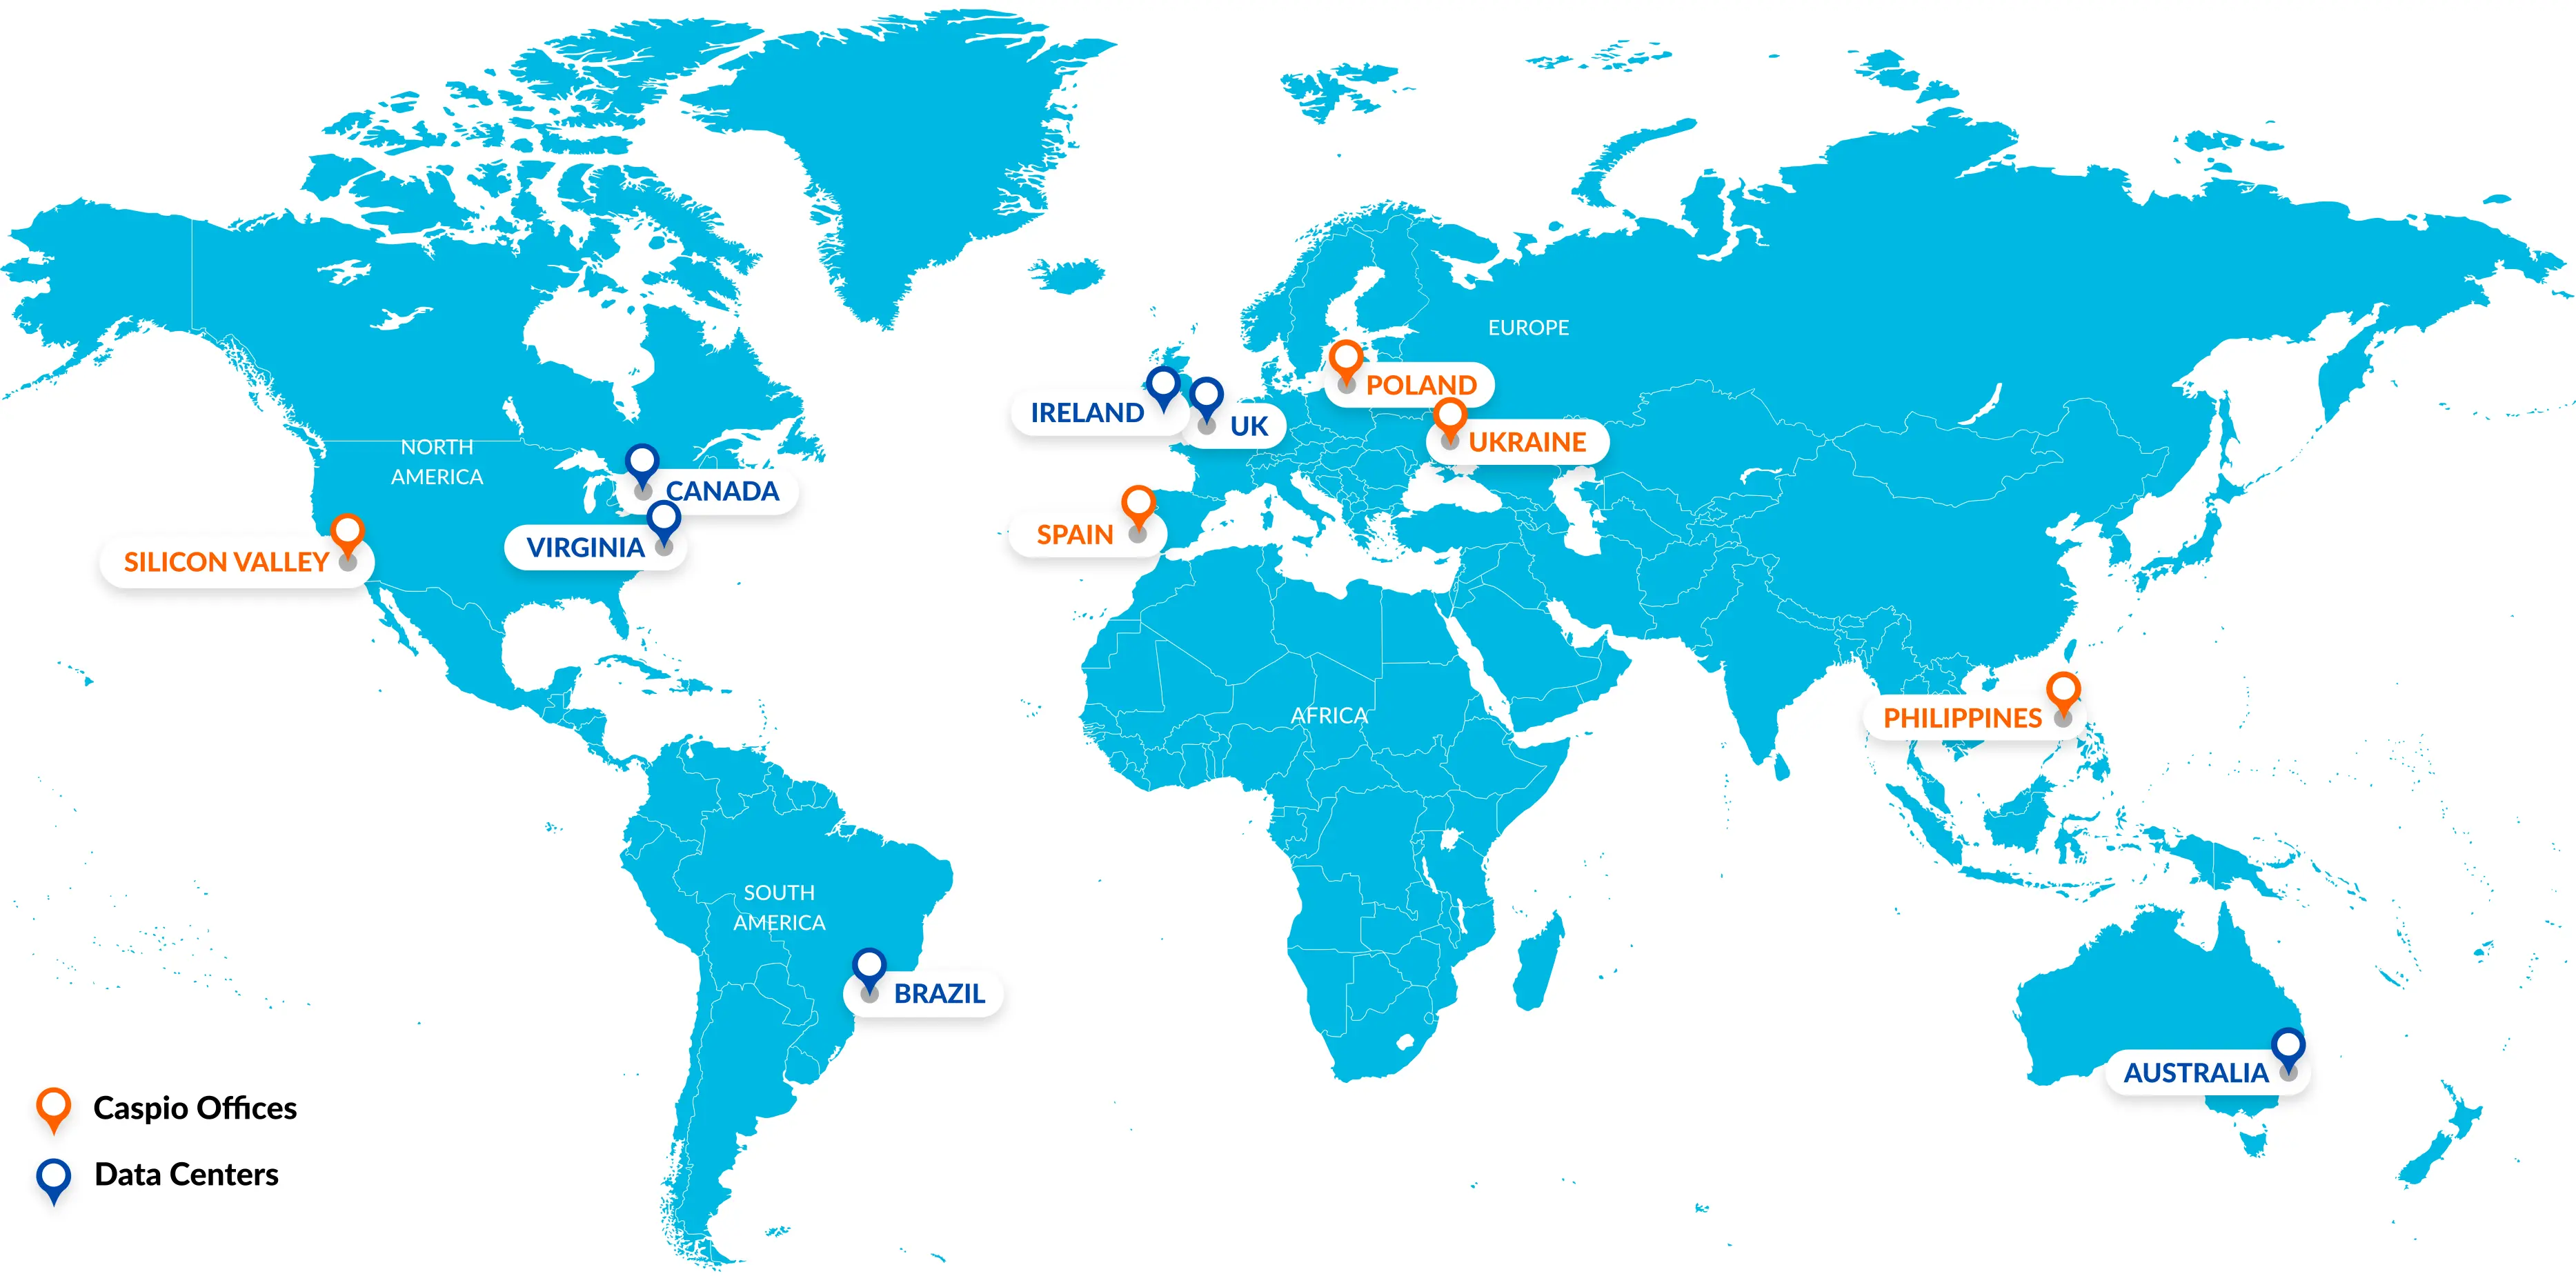 Caspio offices and data centers pinned on a world map